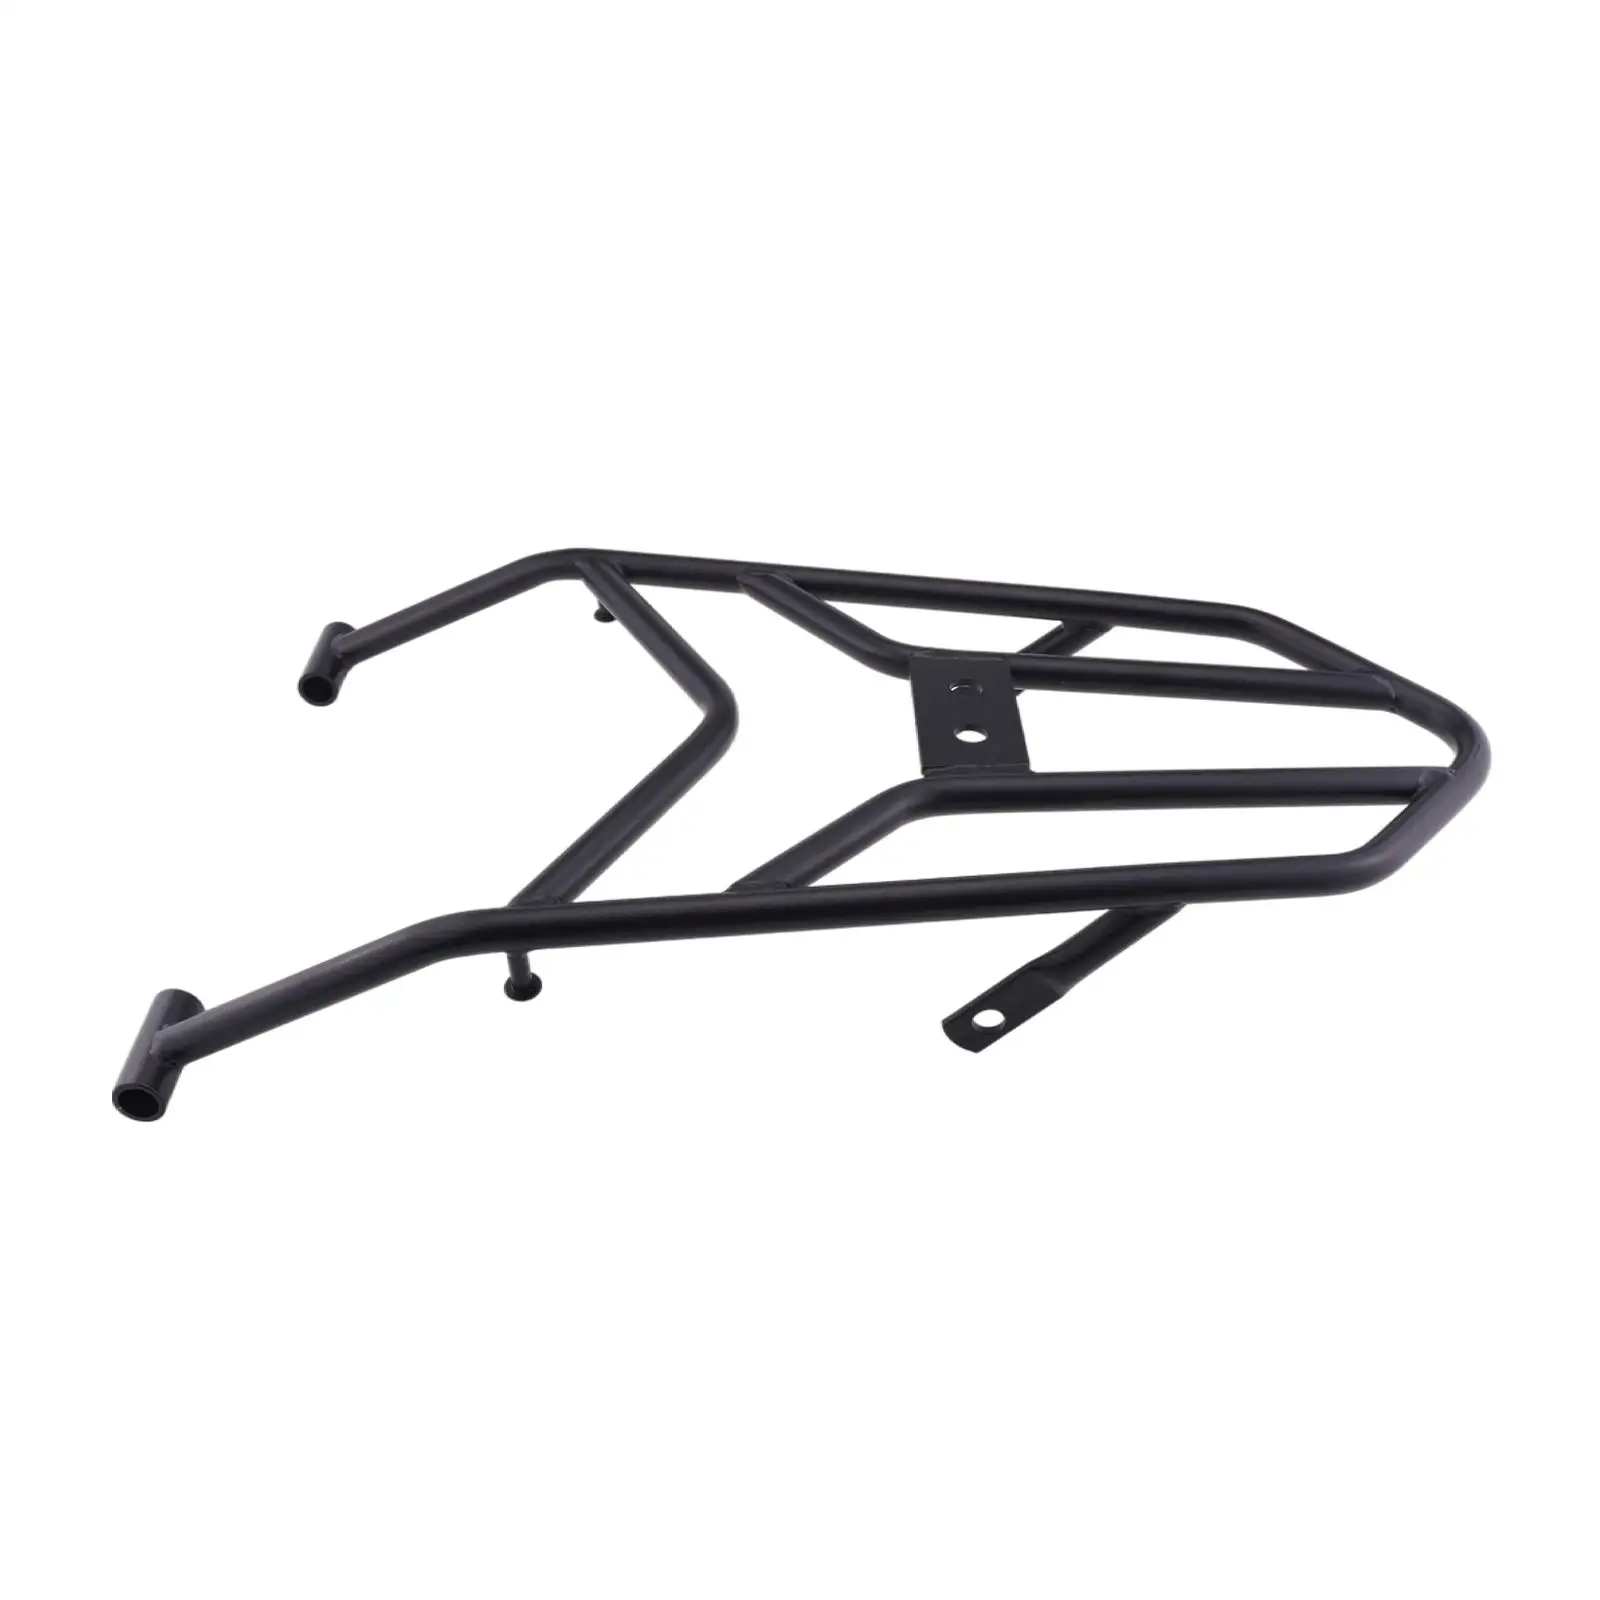 Motorcycle Rear Tail Rack Motorcycle Parts for